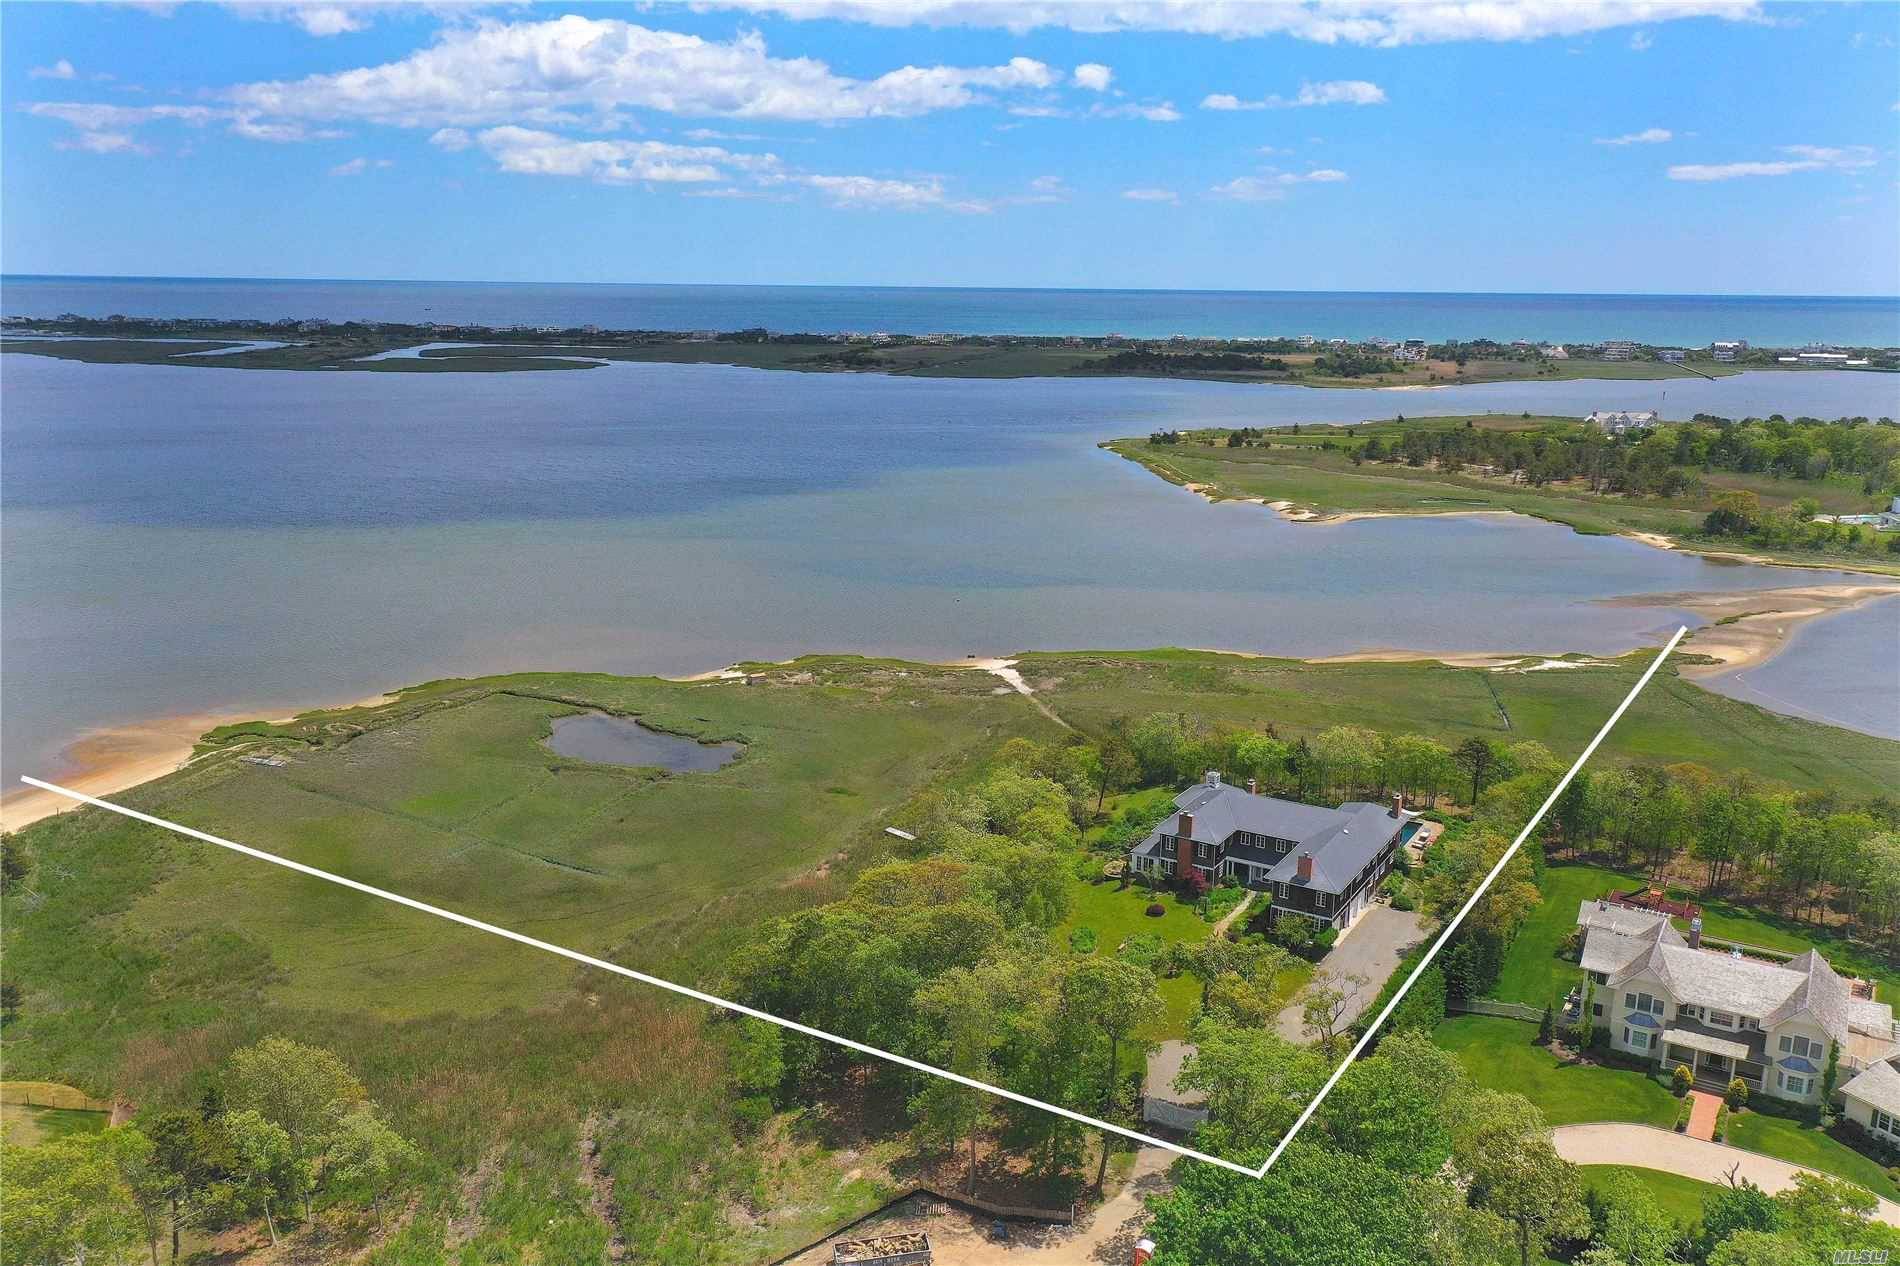 Set at the end of the prestigious Bay Road in Quogue, sits this exquisite waterfront home with breathtaking views of Shinnecock Bay.